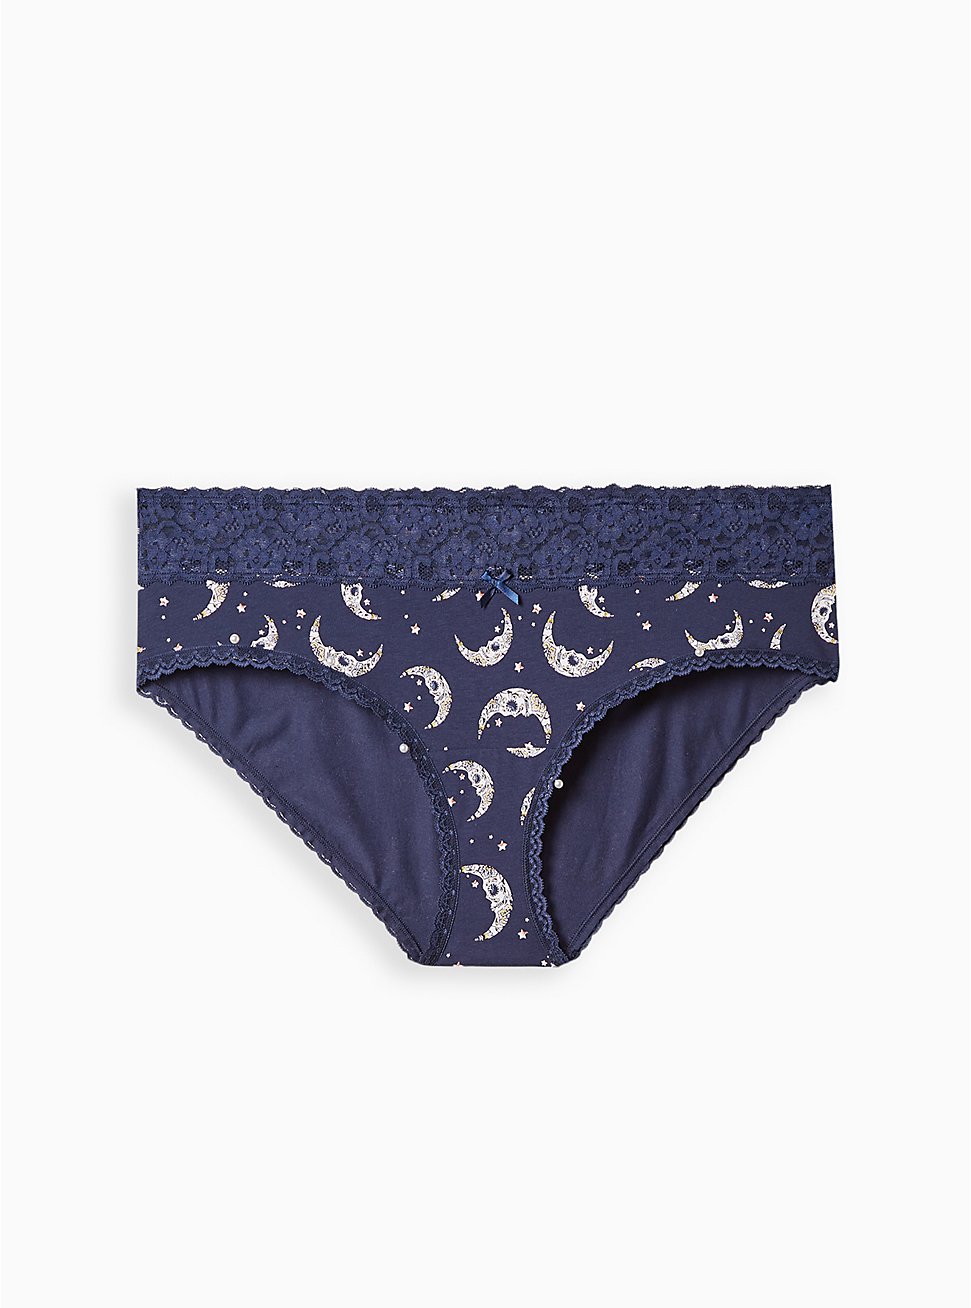 Plus Size Navy Moons Wide Lace Cotton Hipster Panty, MUERTOS MOONS- Navy, hi-res